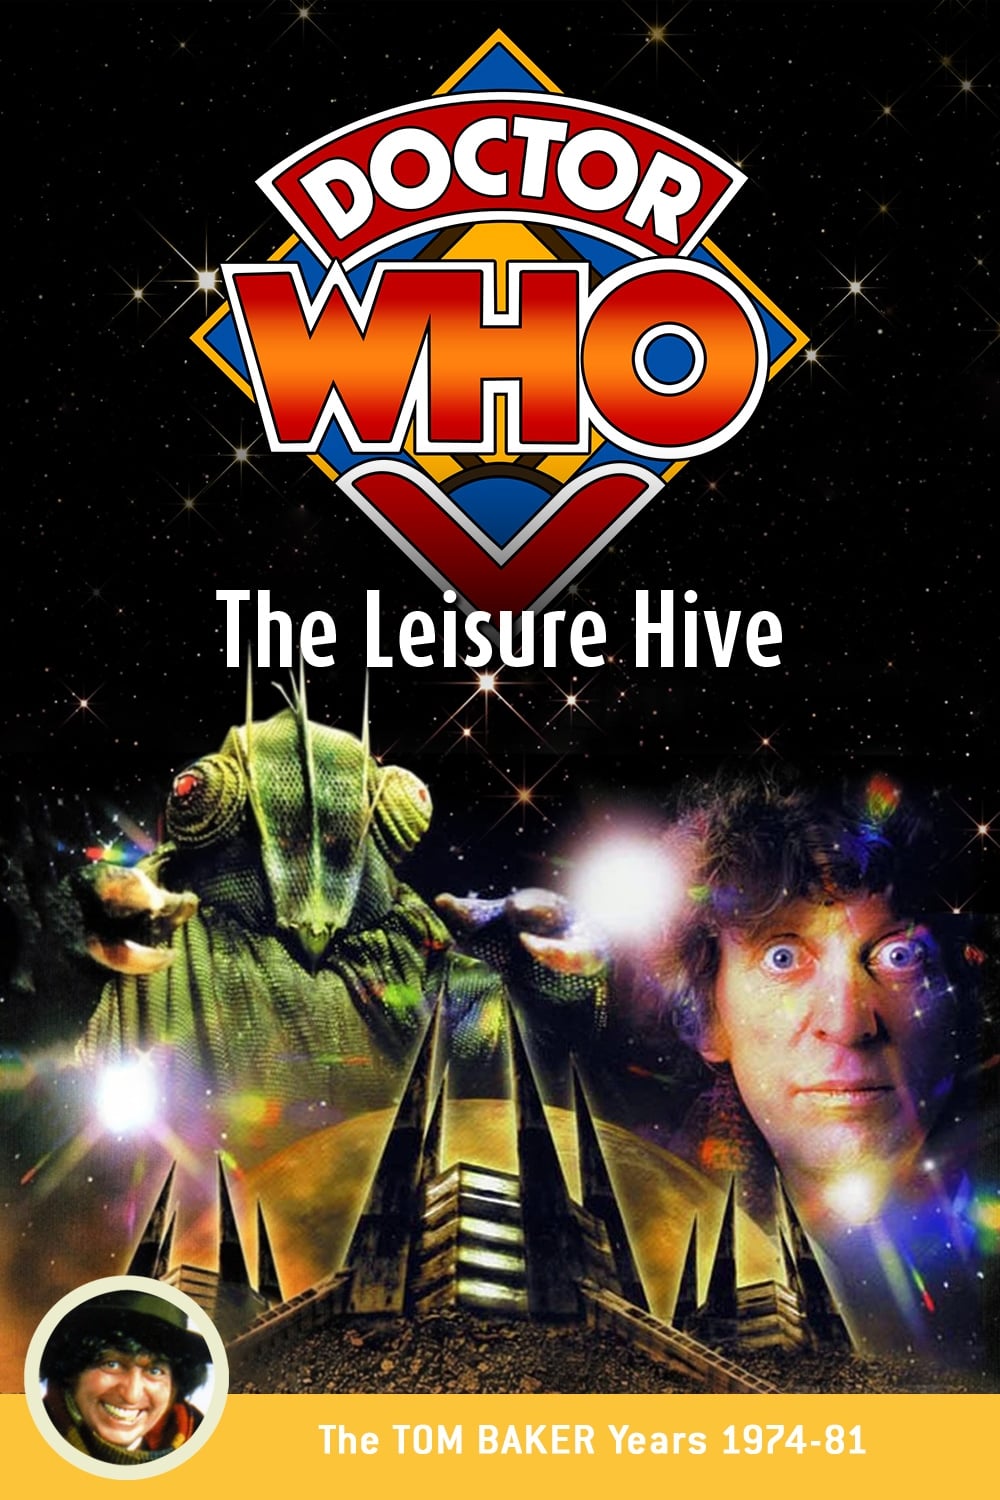 Doctor Who: The Leisure Hive (1980)